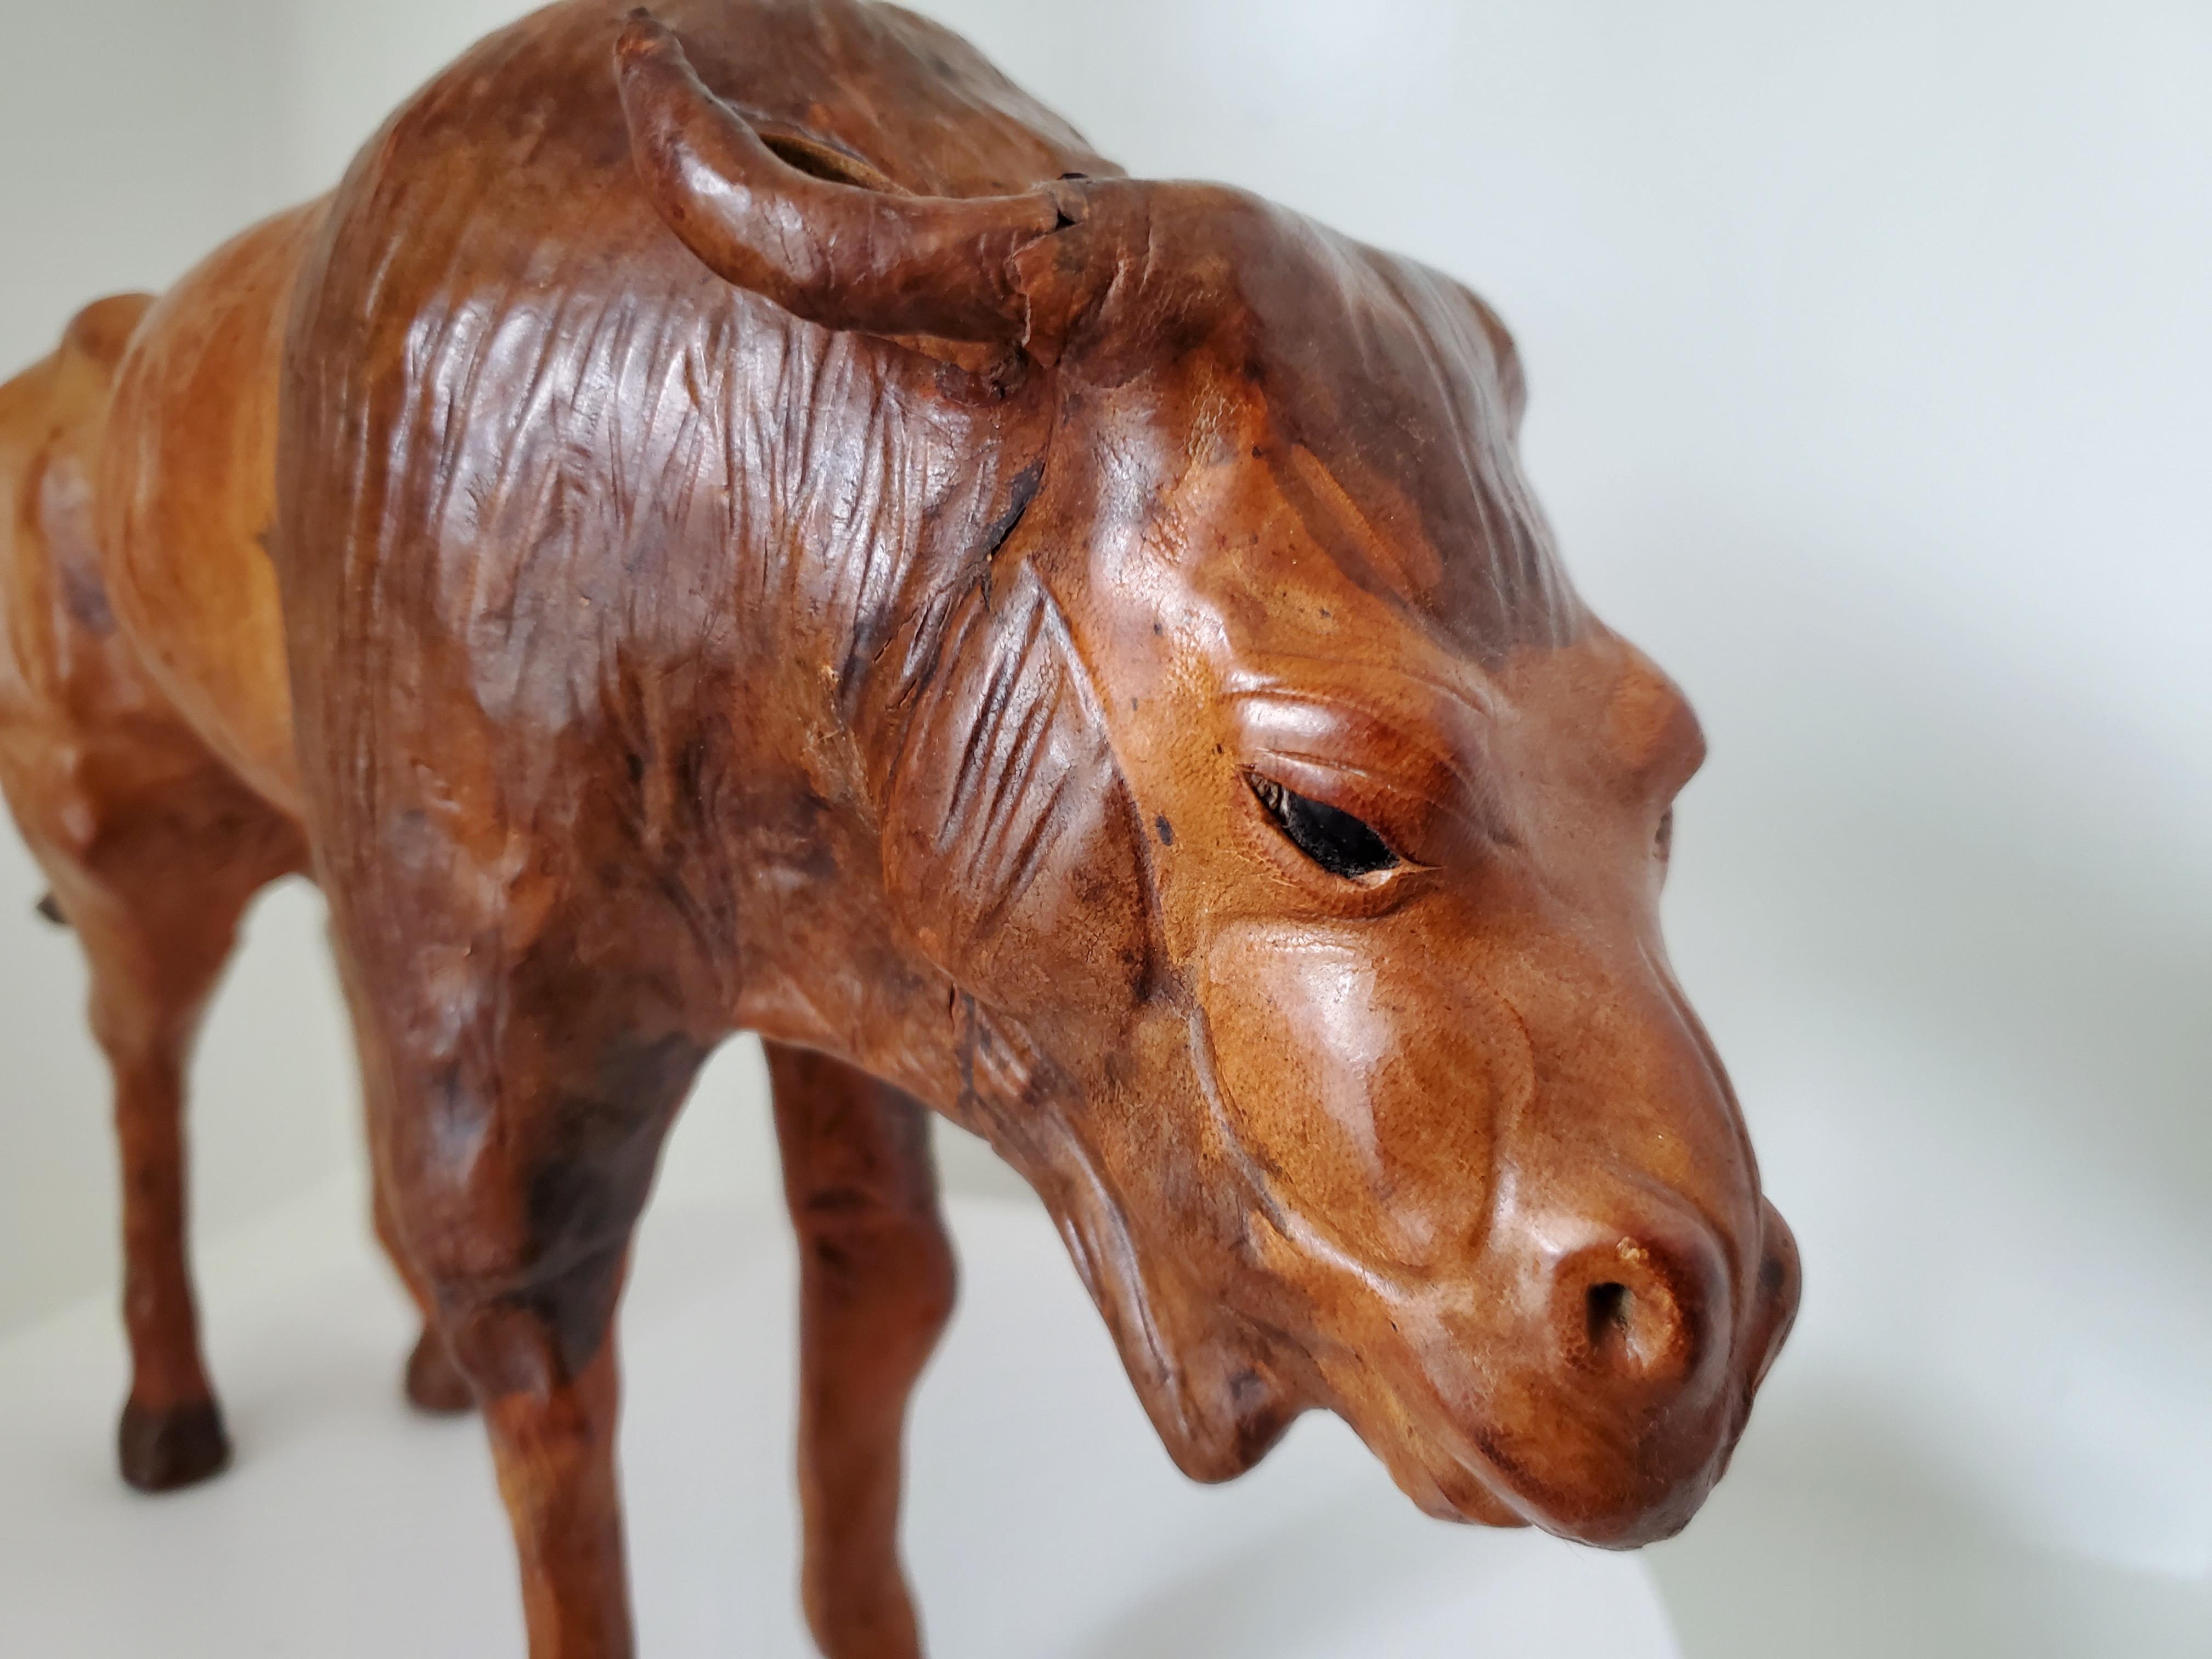 Animal Skin Vintage Sculpture - Wood and Leather Wildebeest Likely from Liberty's London For Sale